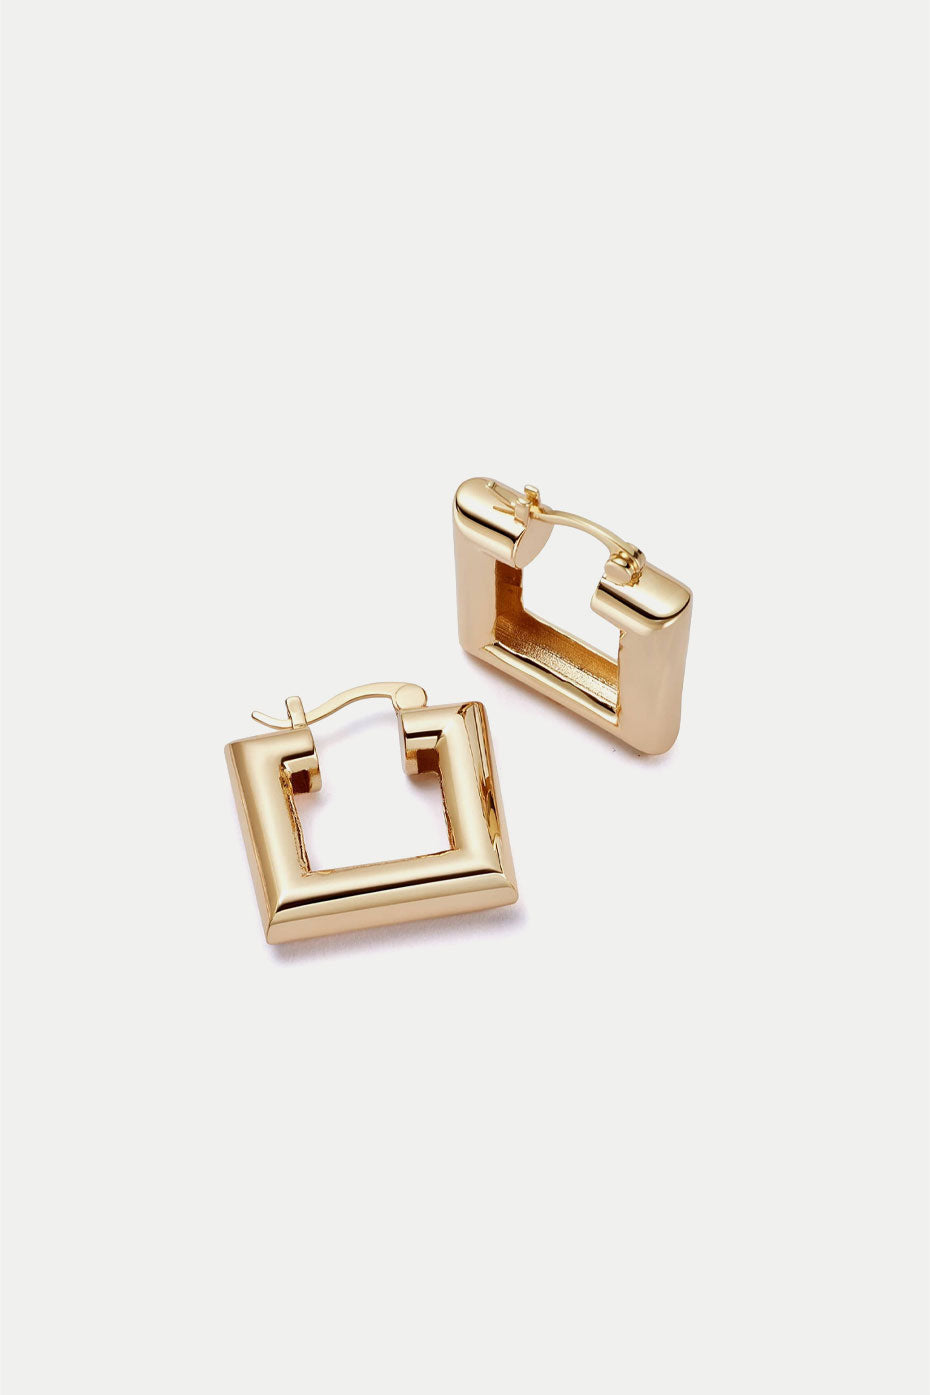 Daisy London Gold Plated Polly Sayer Chubby Square Hoops